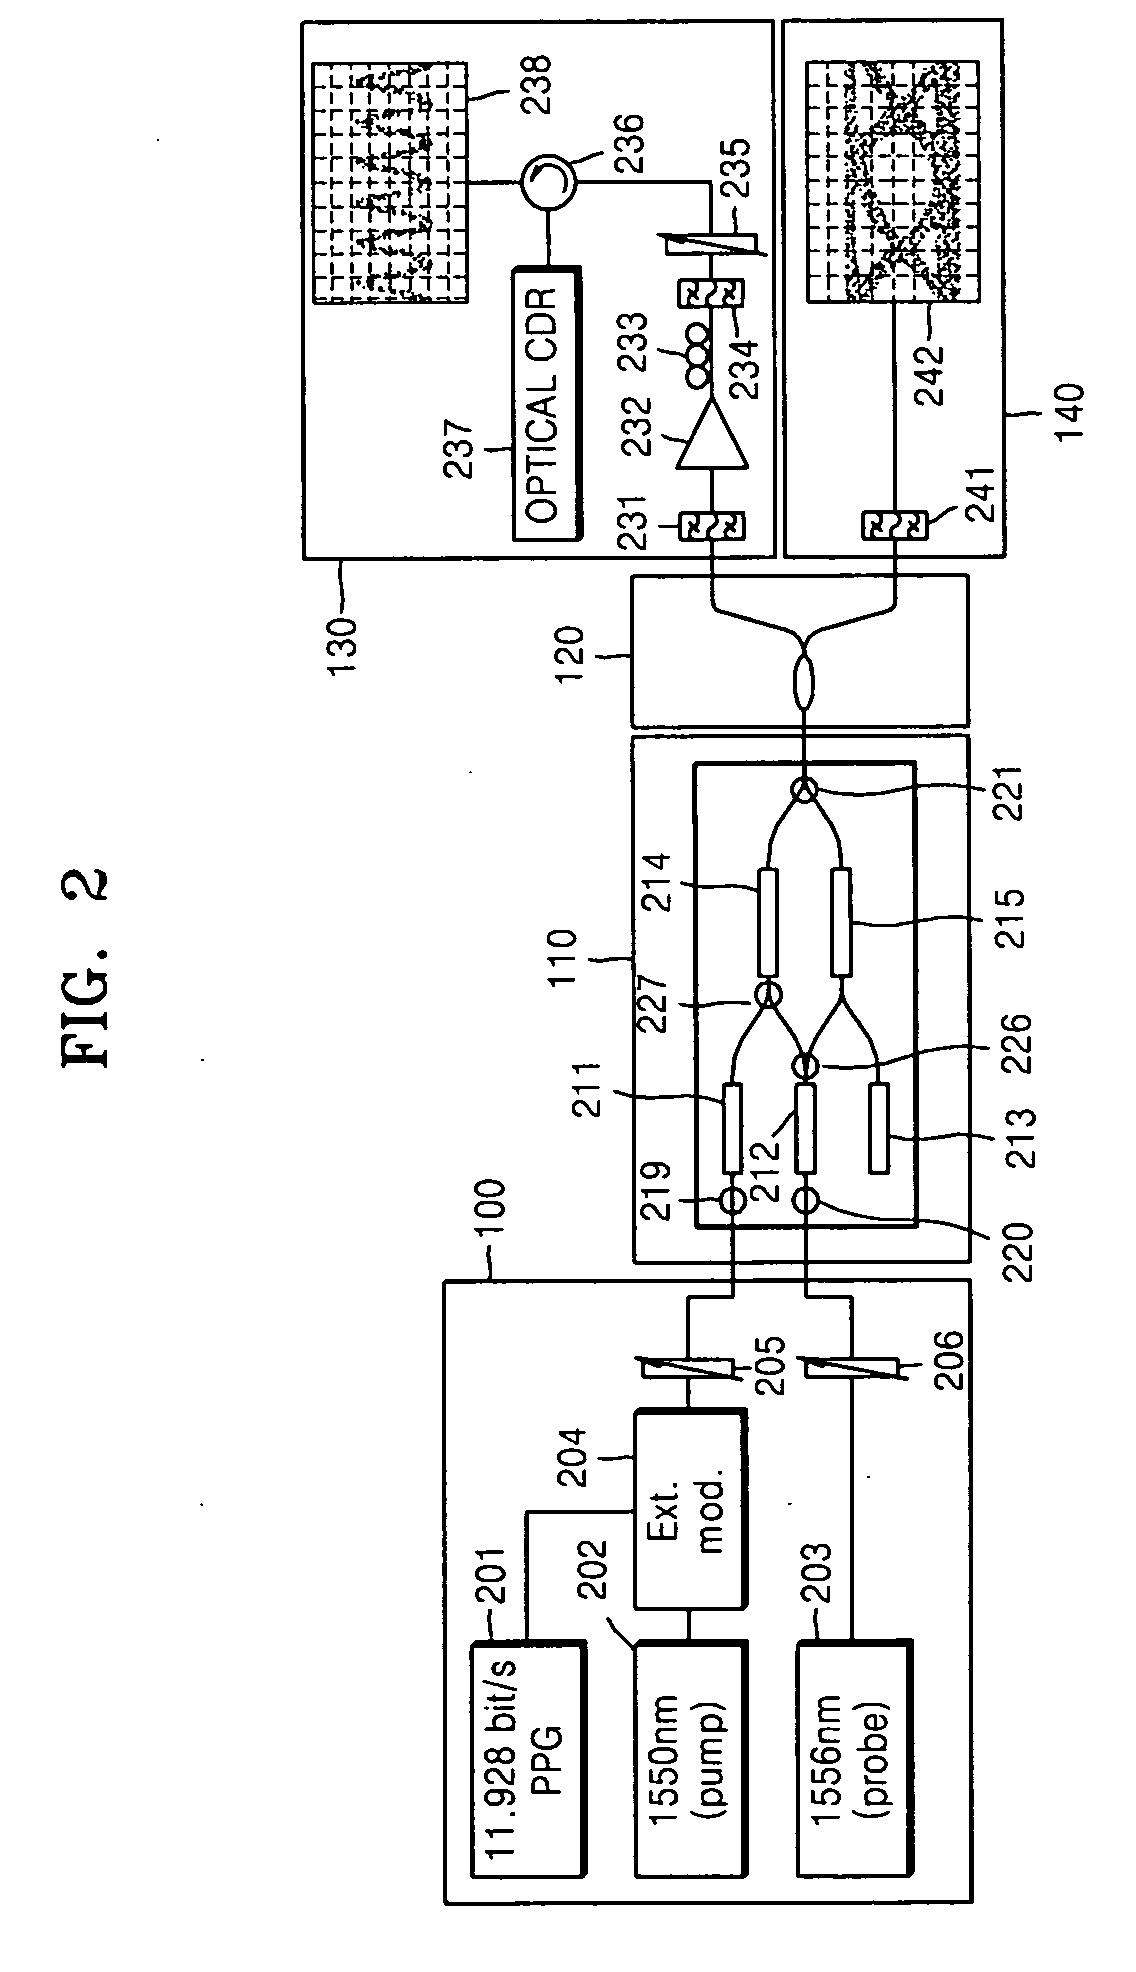 Apparatus and method for wavelength conversion and clock signal extraction using semiconductor optical amplifiers